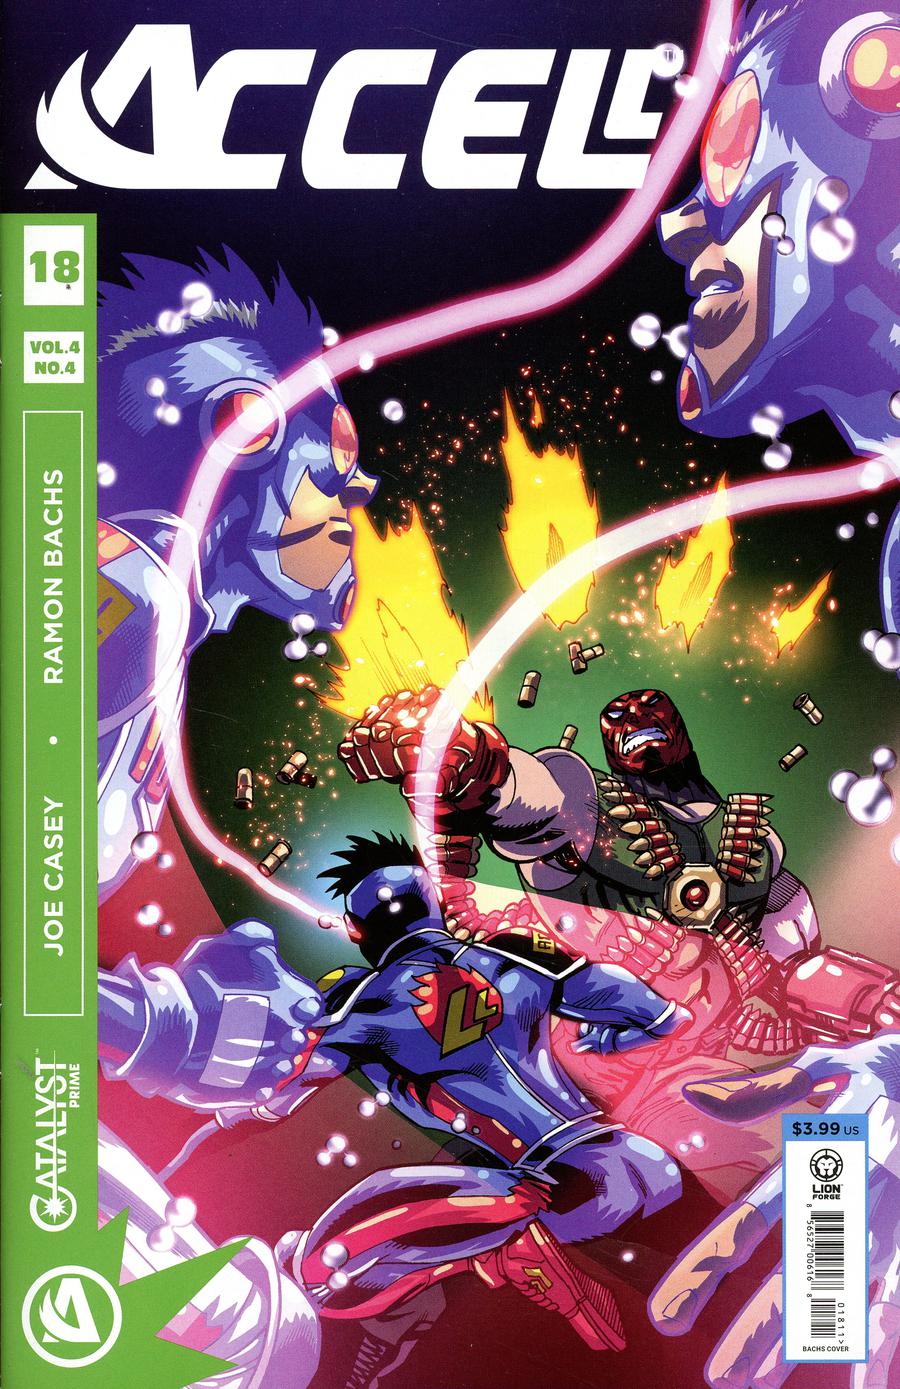 Catalyst Prime Accell #18